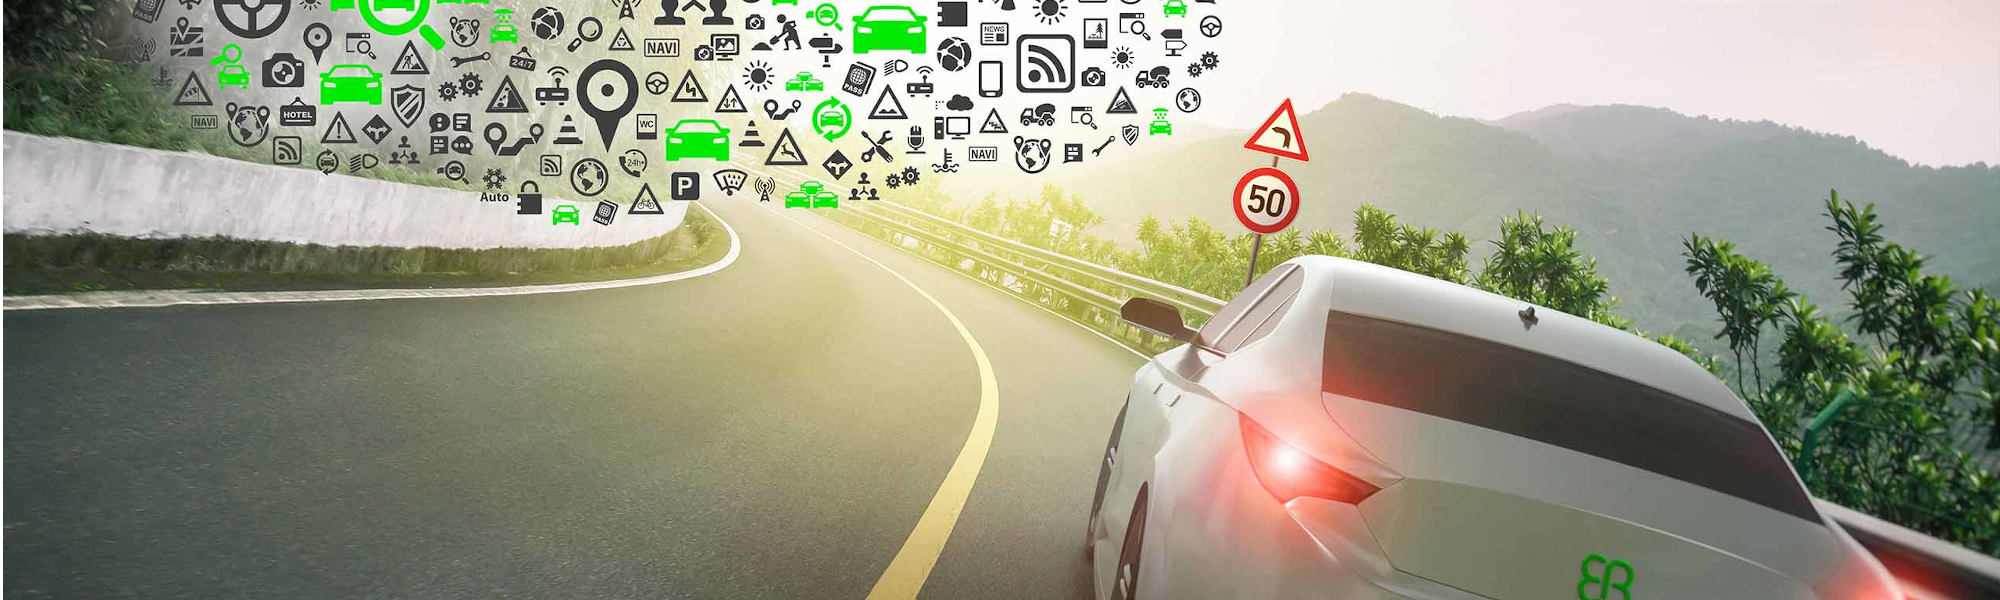 Automotive Verification and Validation Services for connected vehicles